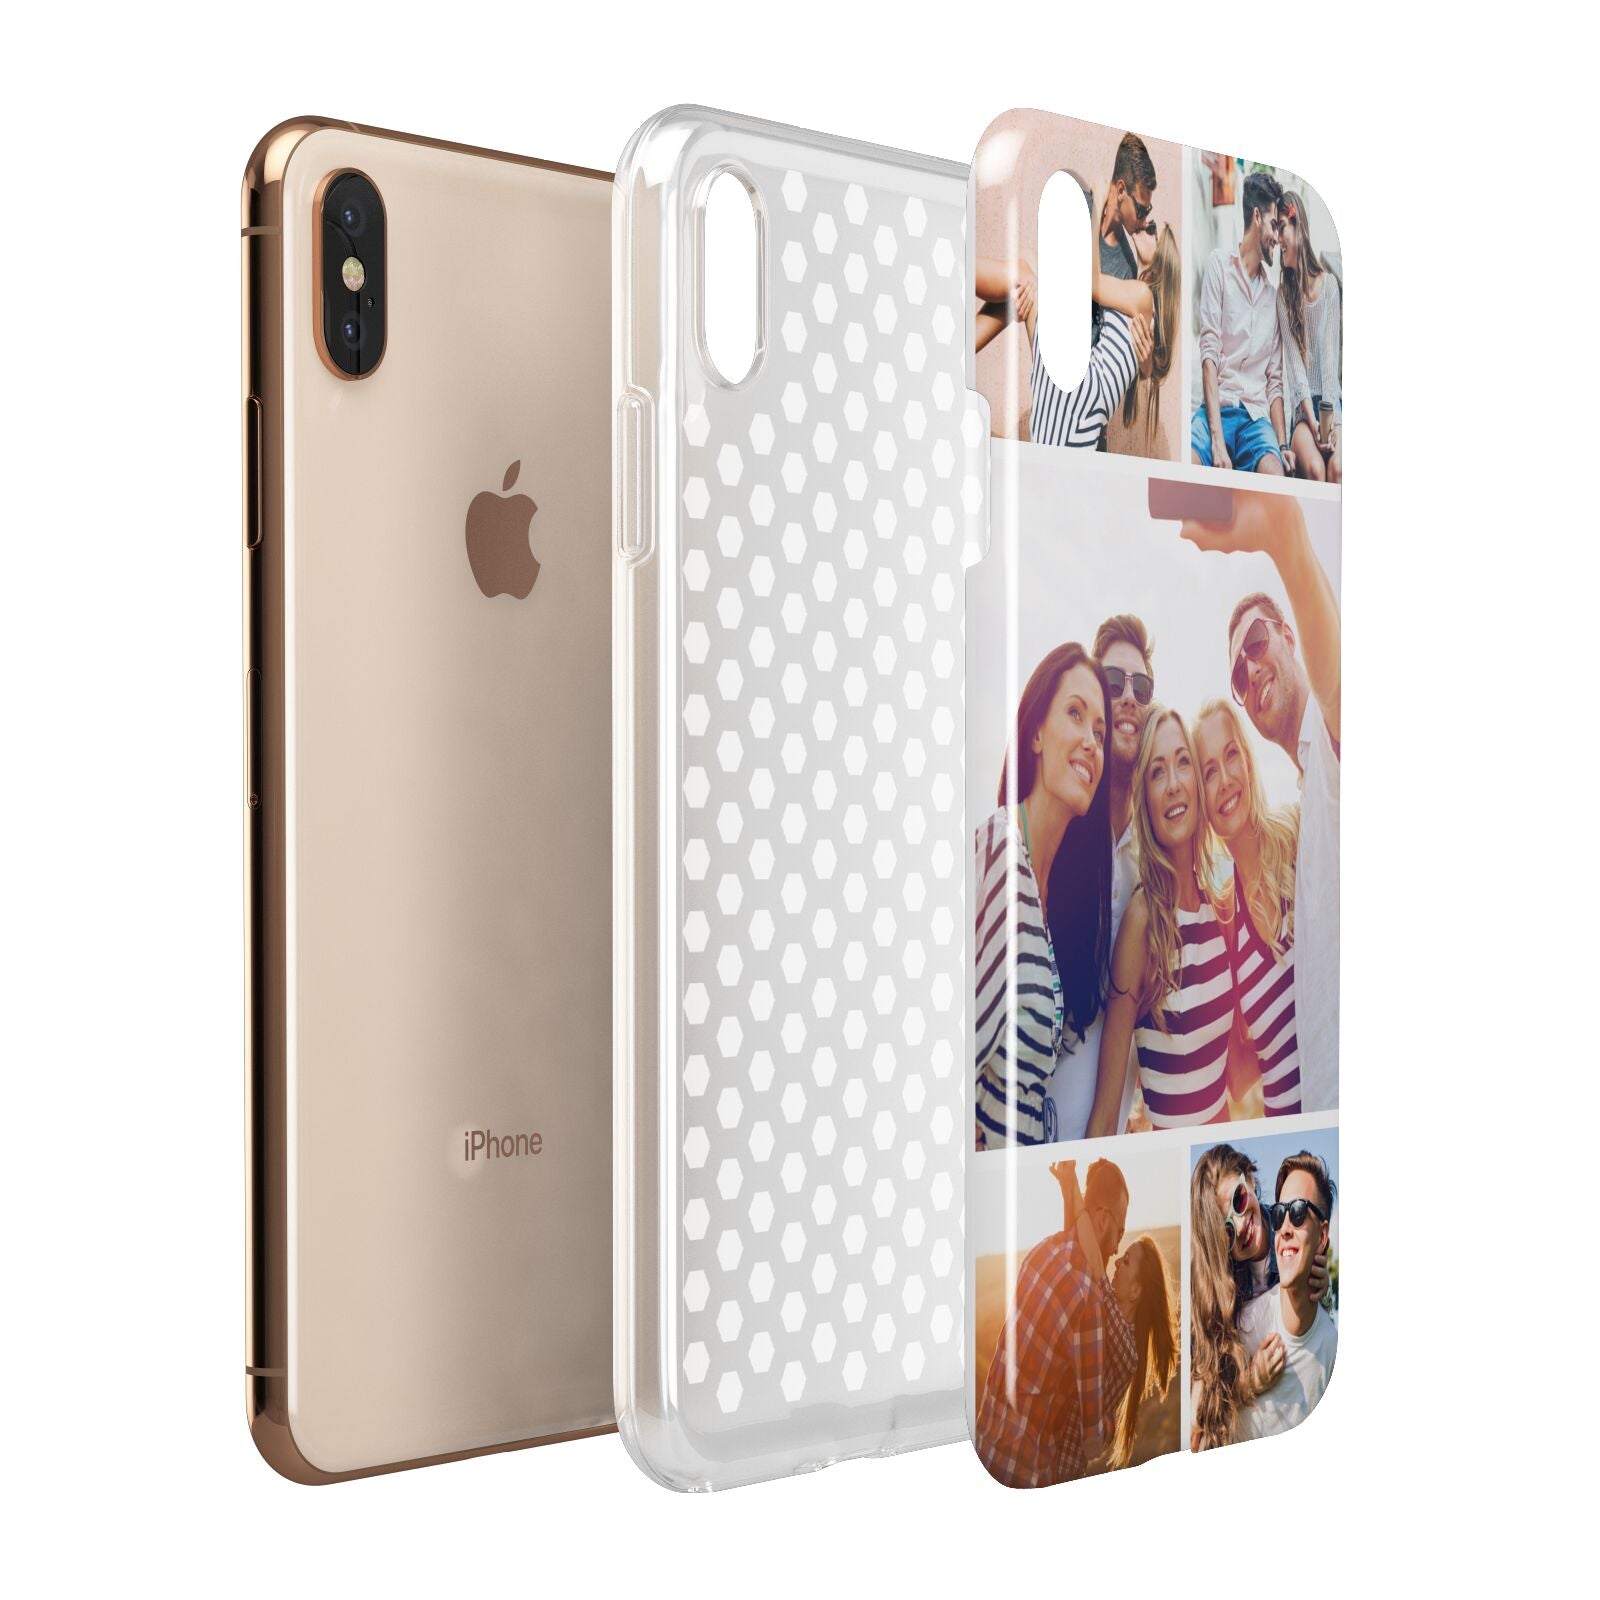 Tile Photo Collage Upload Apple iPhone Xs Max 3D Tough Case Expanded View